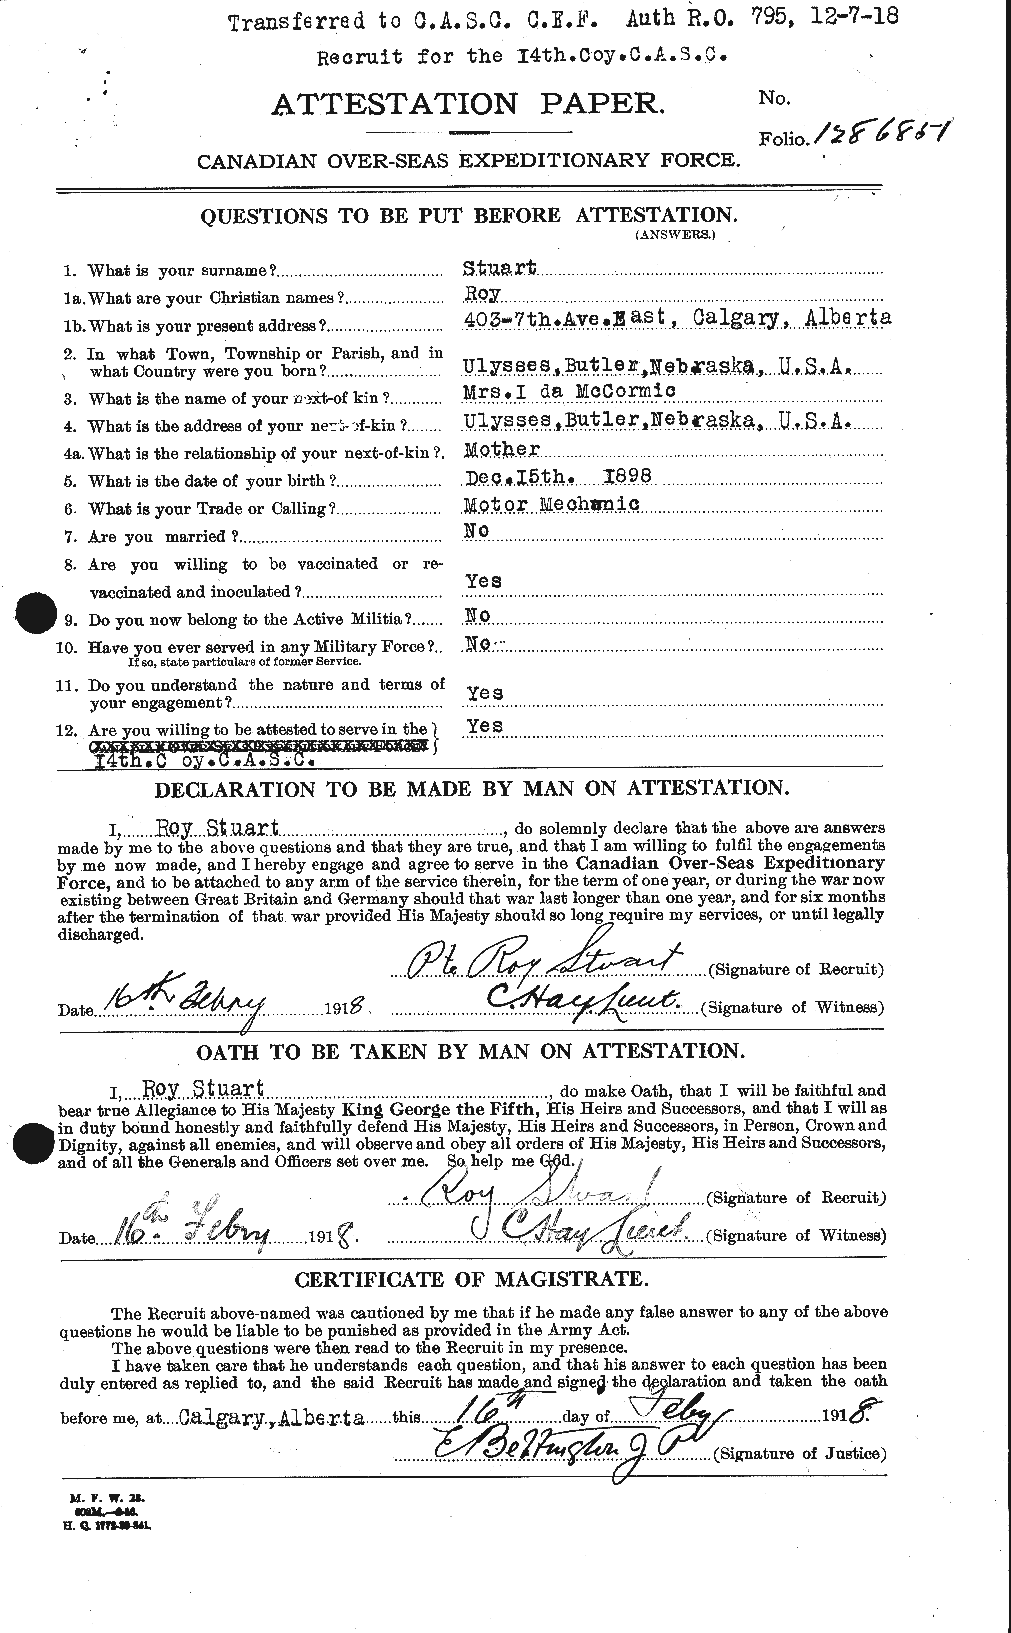 Personnel Records of the First World War - CEF 125246a